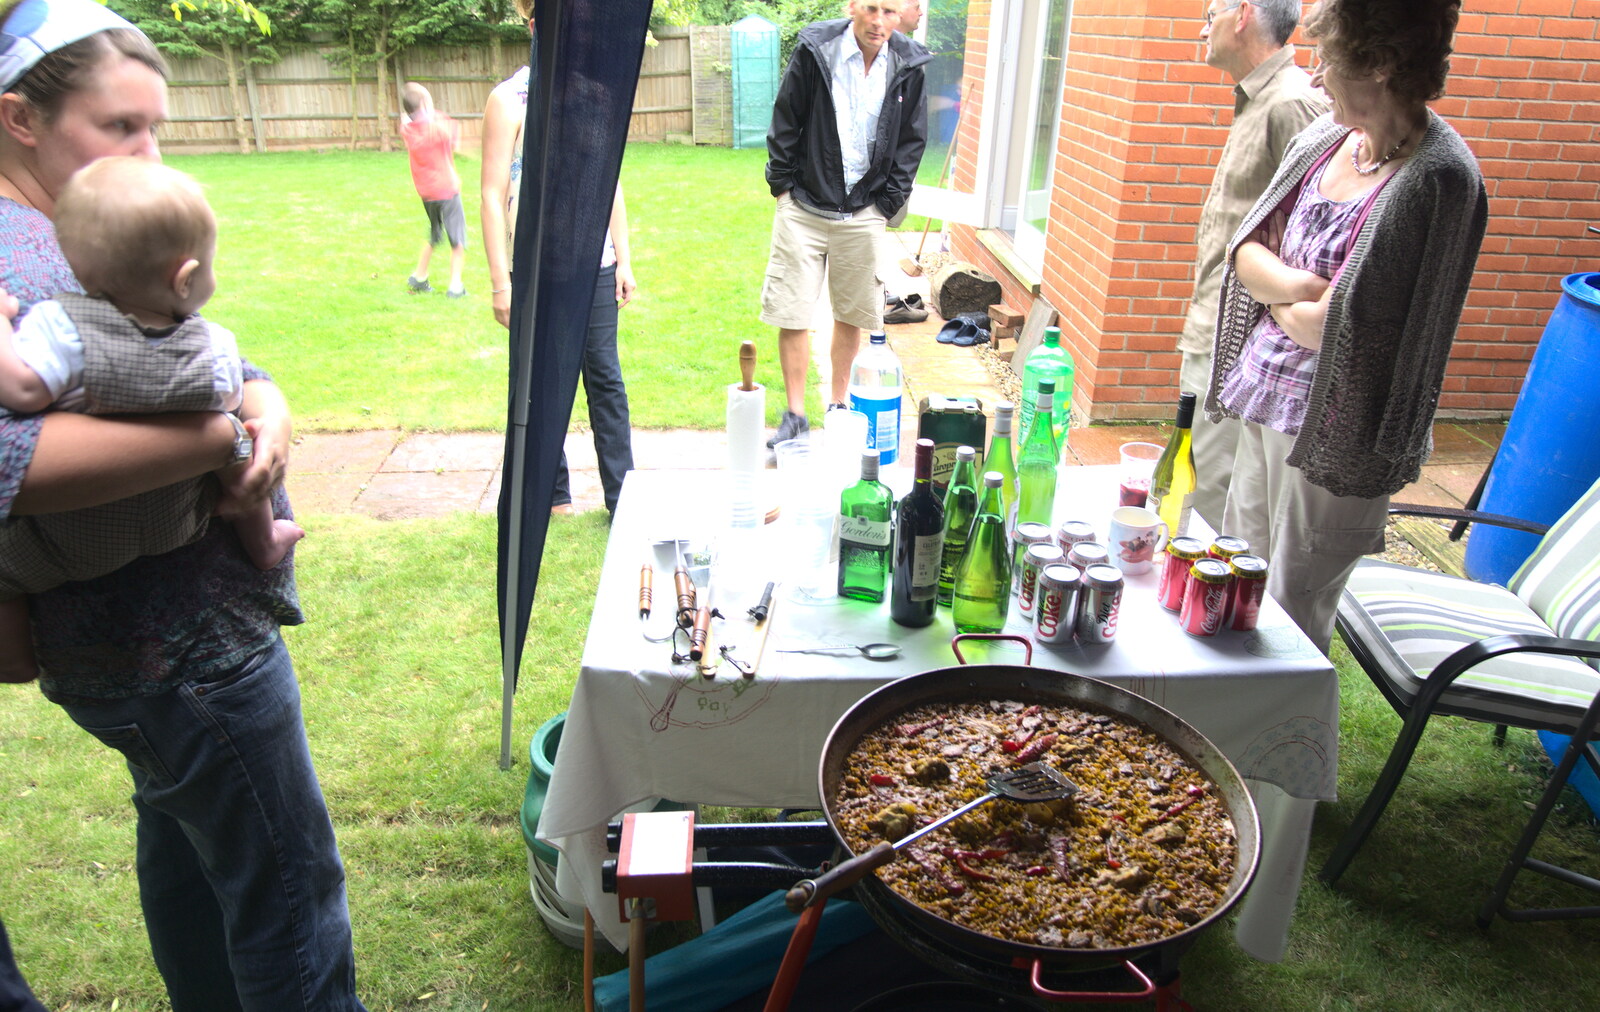 Isobel scopes out the paella from Bill and Carmen's Paella Barbeque, and a Trip to the City, Yaxley and Norwich - 25th August 2012